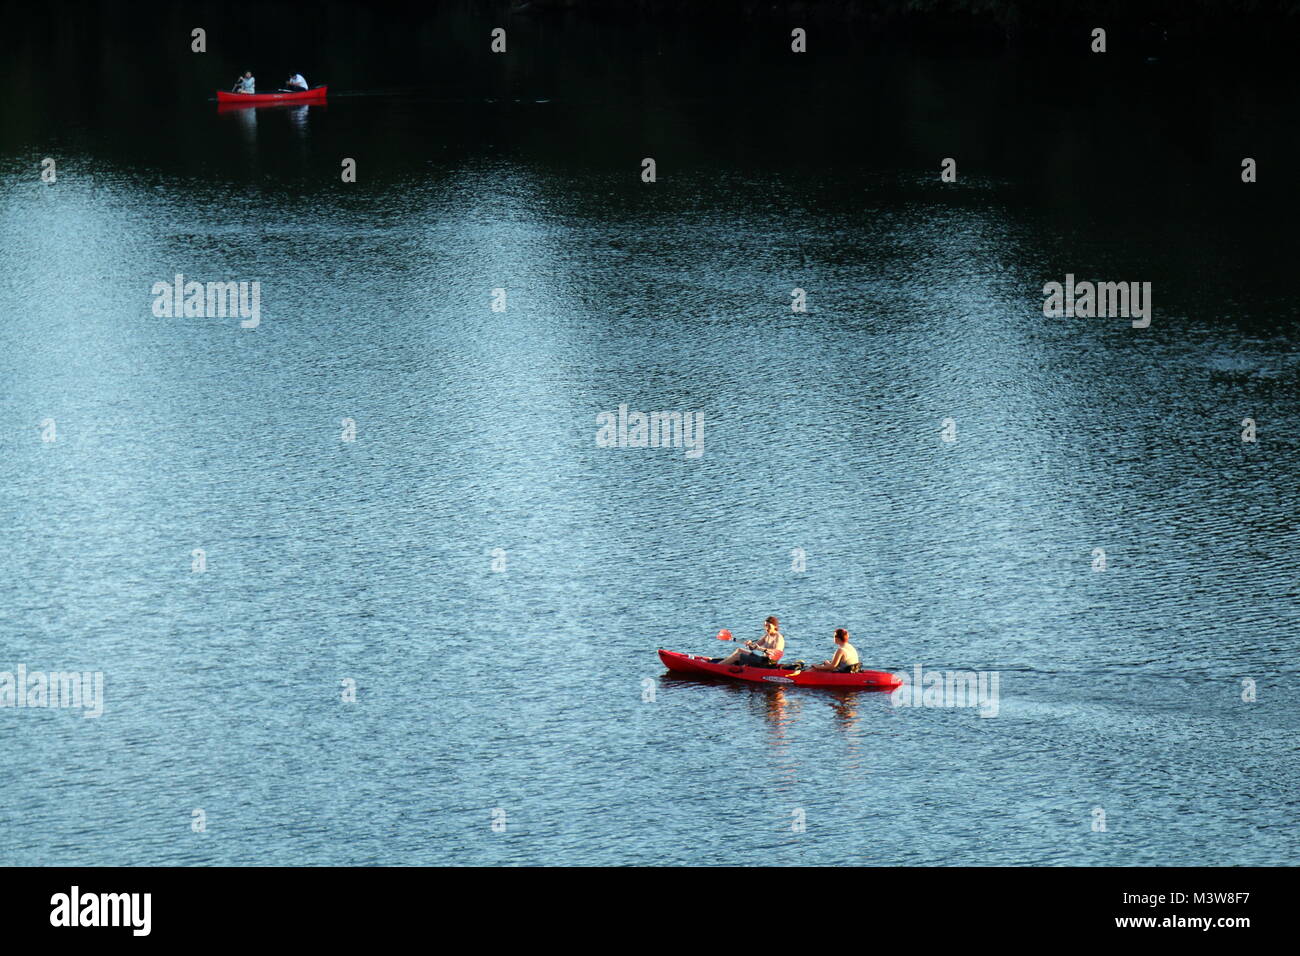 AUSTIN, TEXAS - SEPTEMBER 30, 2017: Two red kayaks navigating light and dark waters of Colorado river as seen from Congress bridge in Austin, Texas. Stock Photo